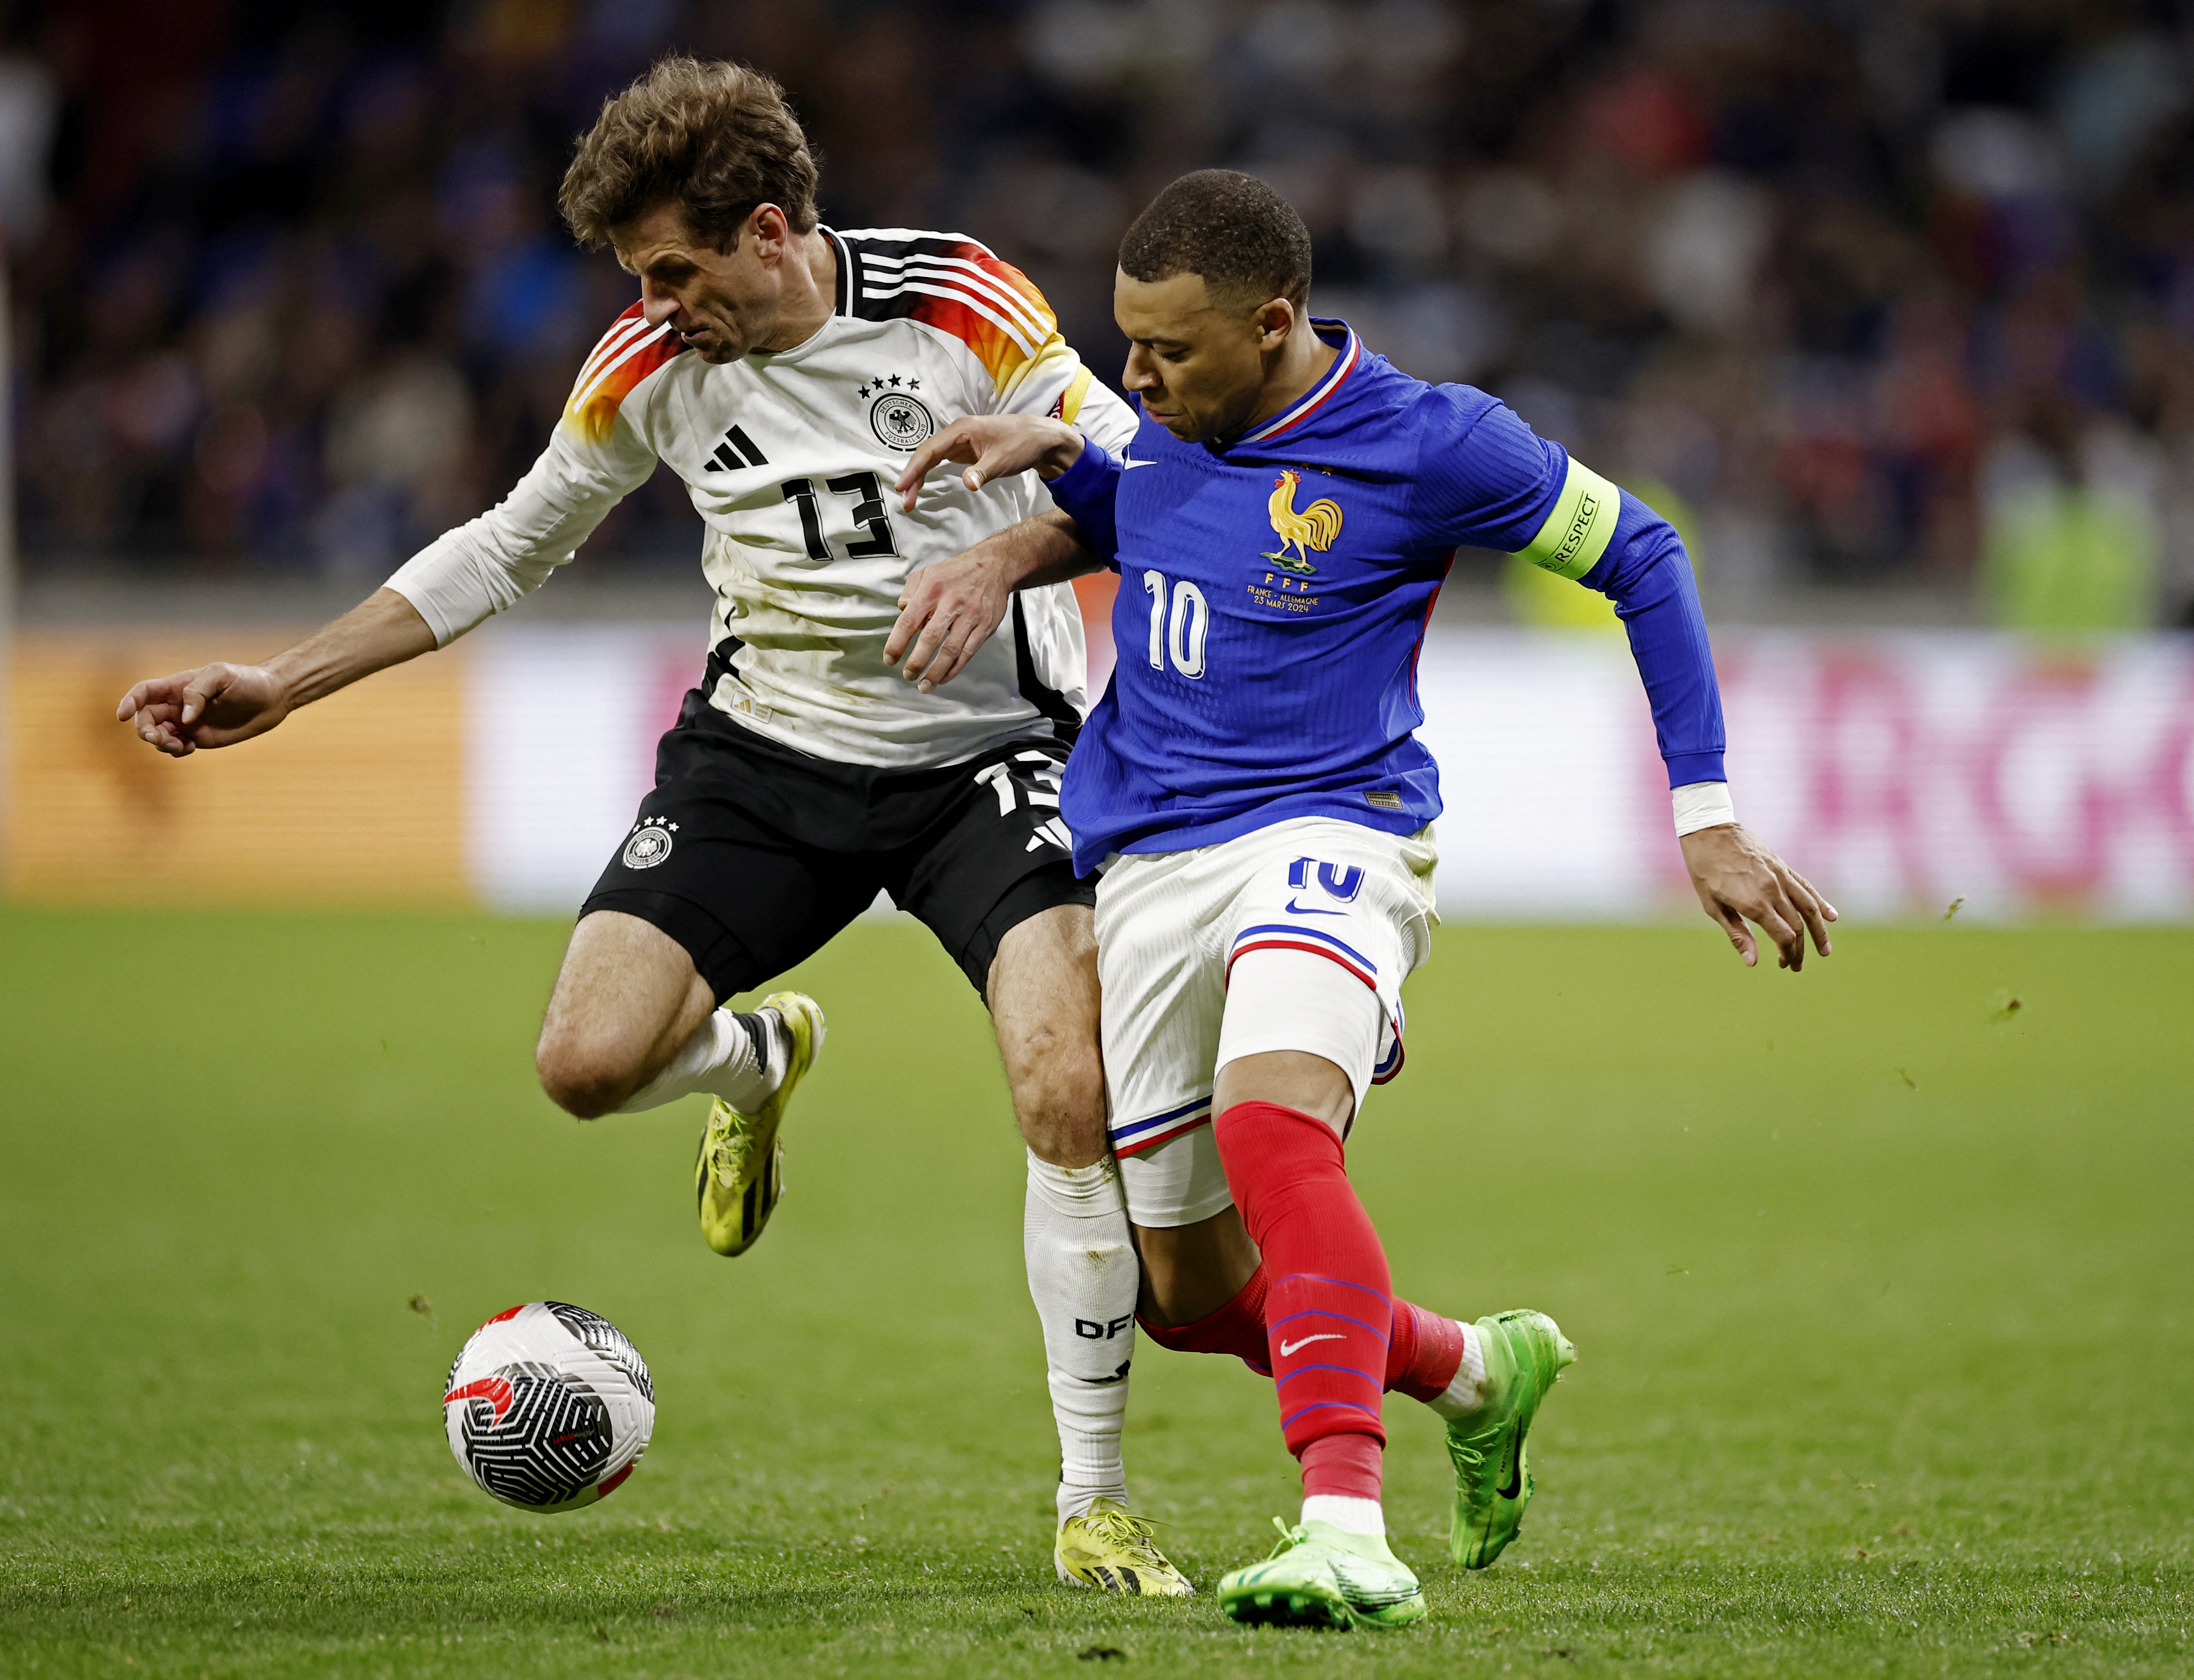 Soccer Football - International Friendly - France v Germany - Groupama Stadium, Lyon, France - March 23, 2024 Germany's Thomas Muller in action with France's Kylian Mbappe REUTERS/Benoit Tessier